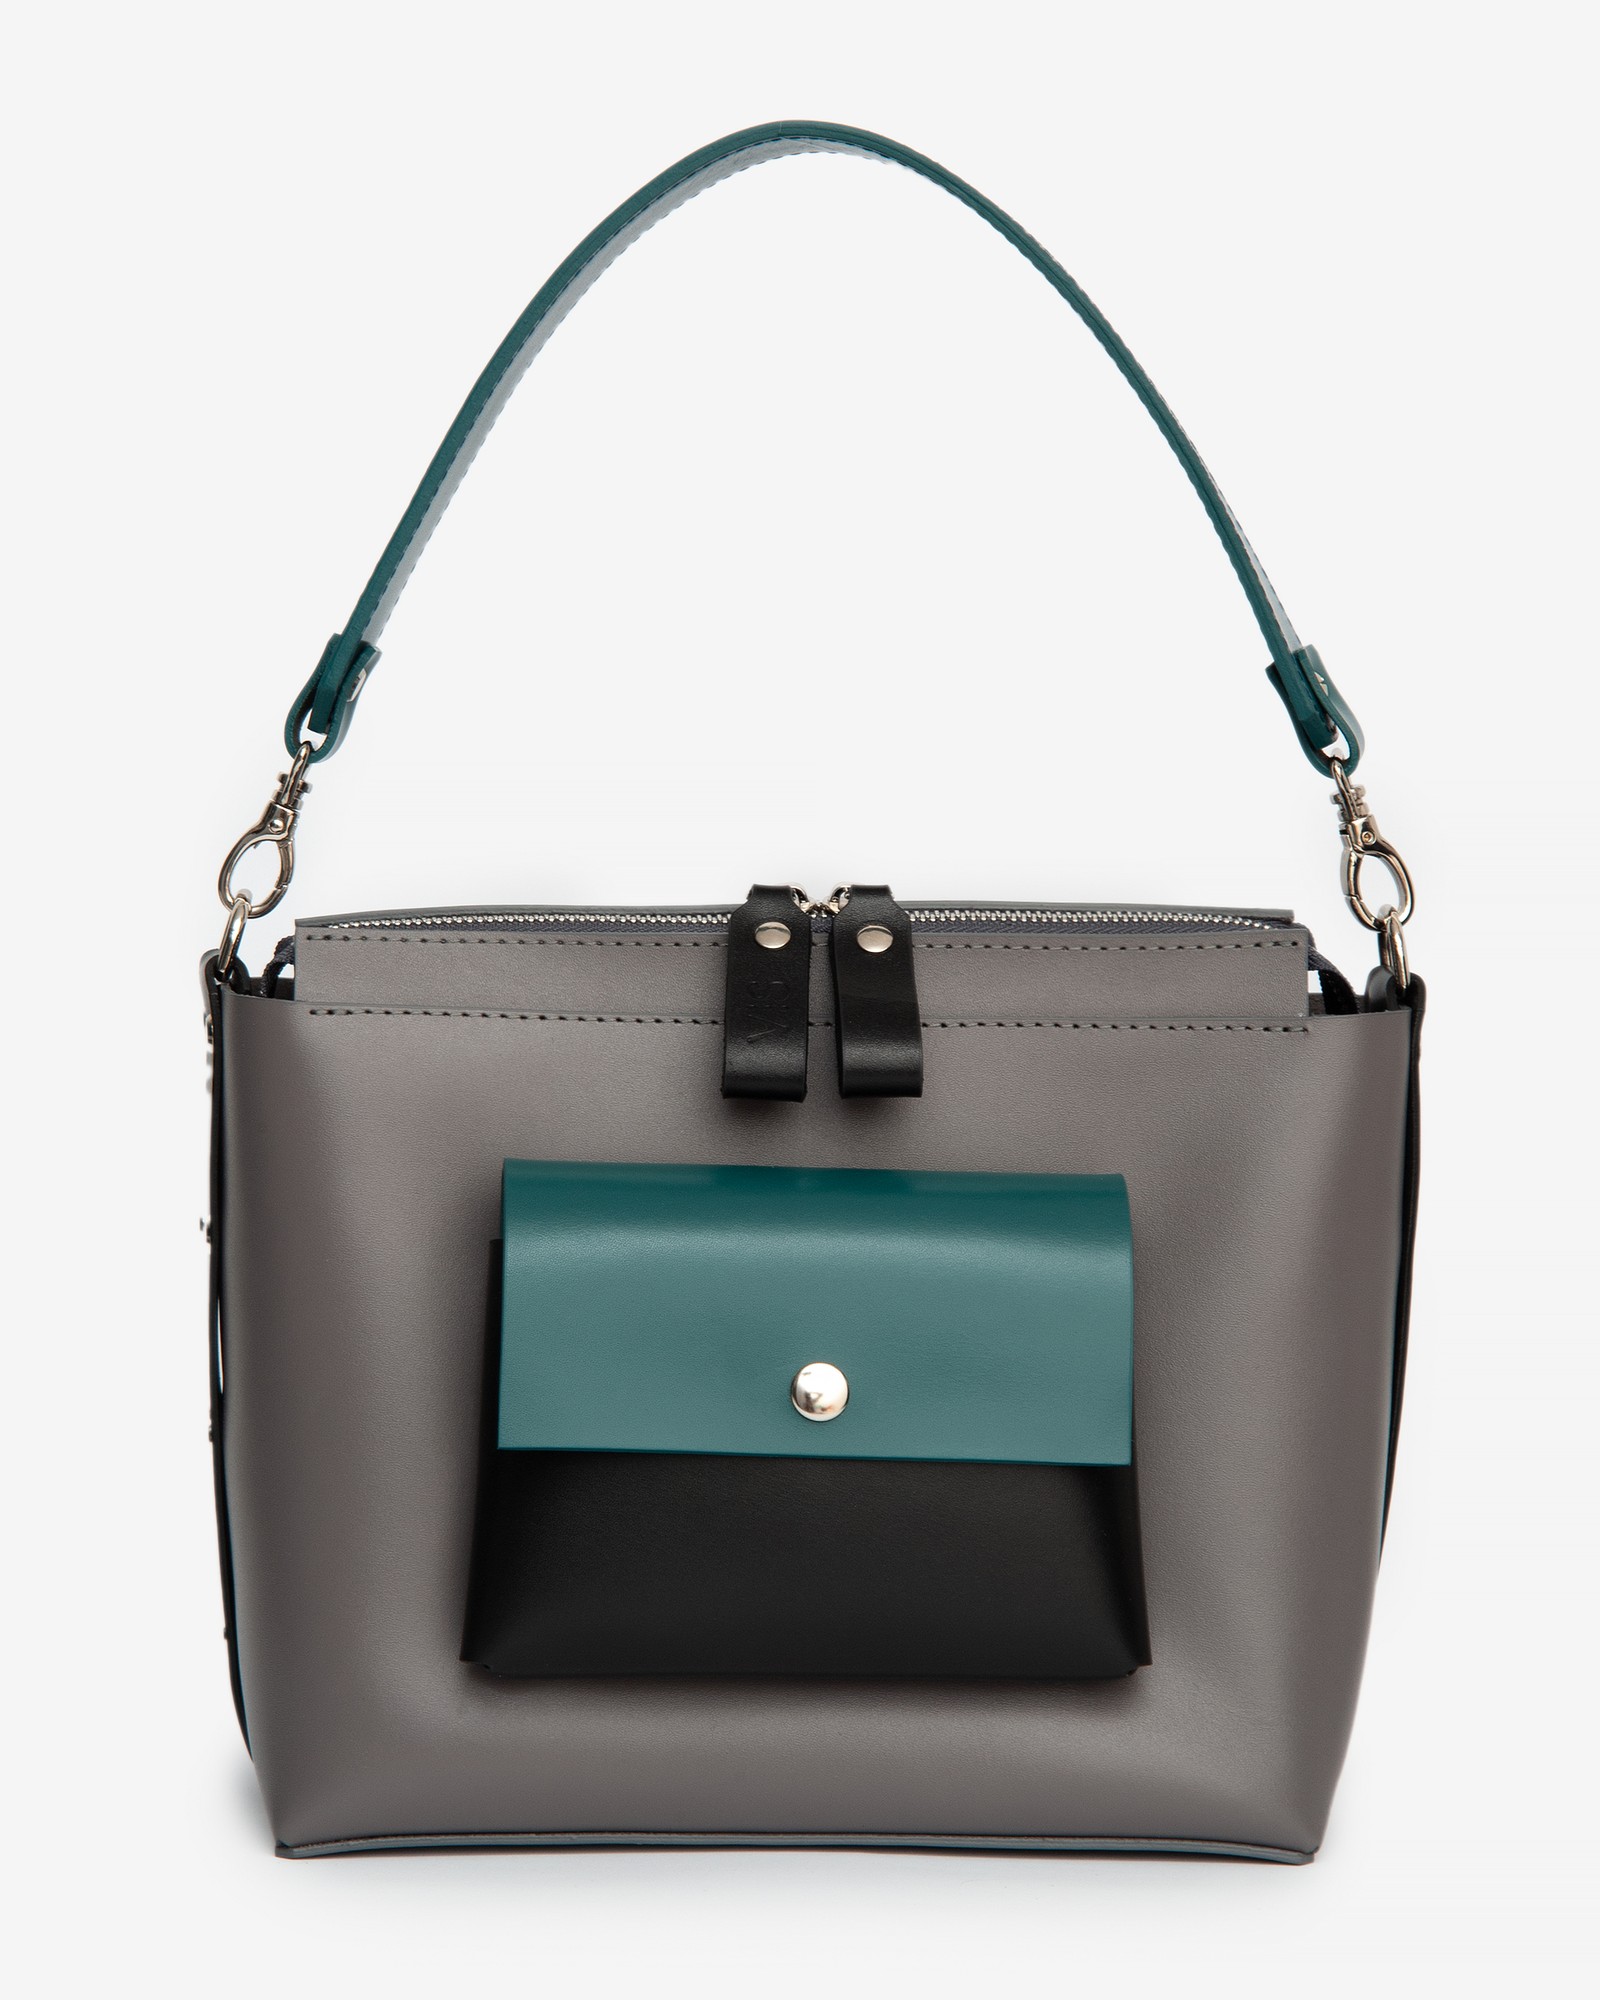 Avrora leather bag. Black, pine green and grey color